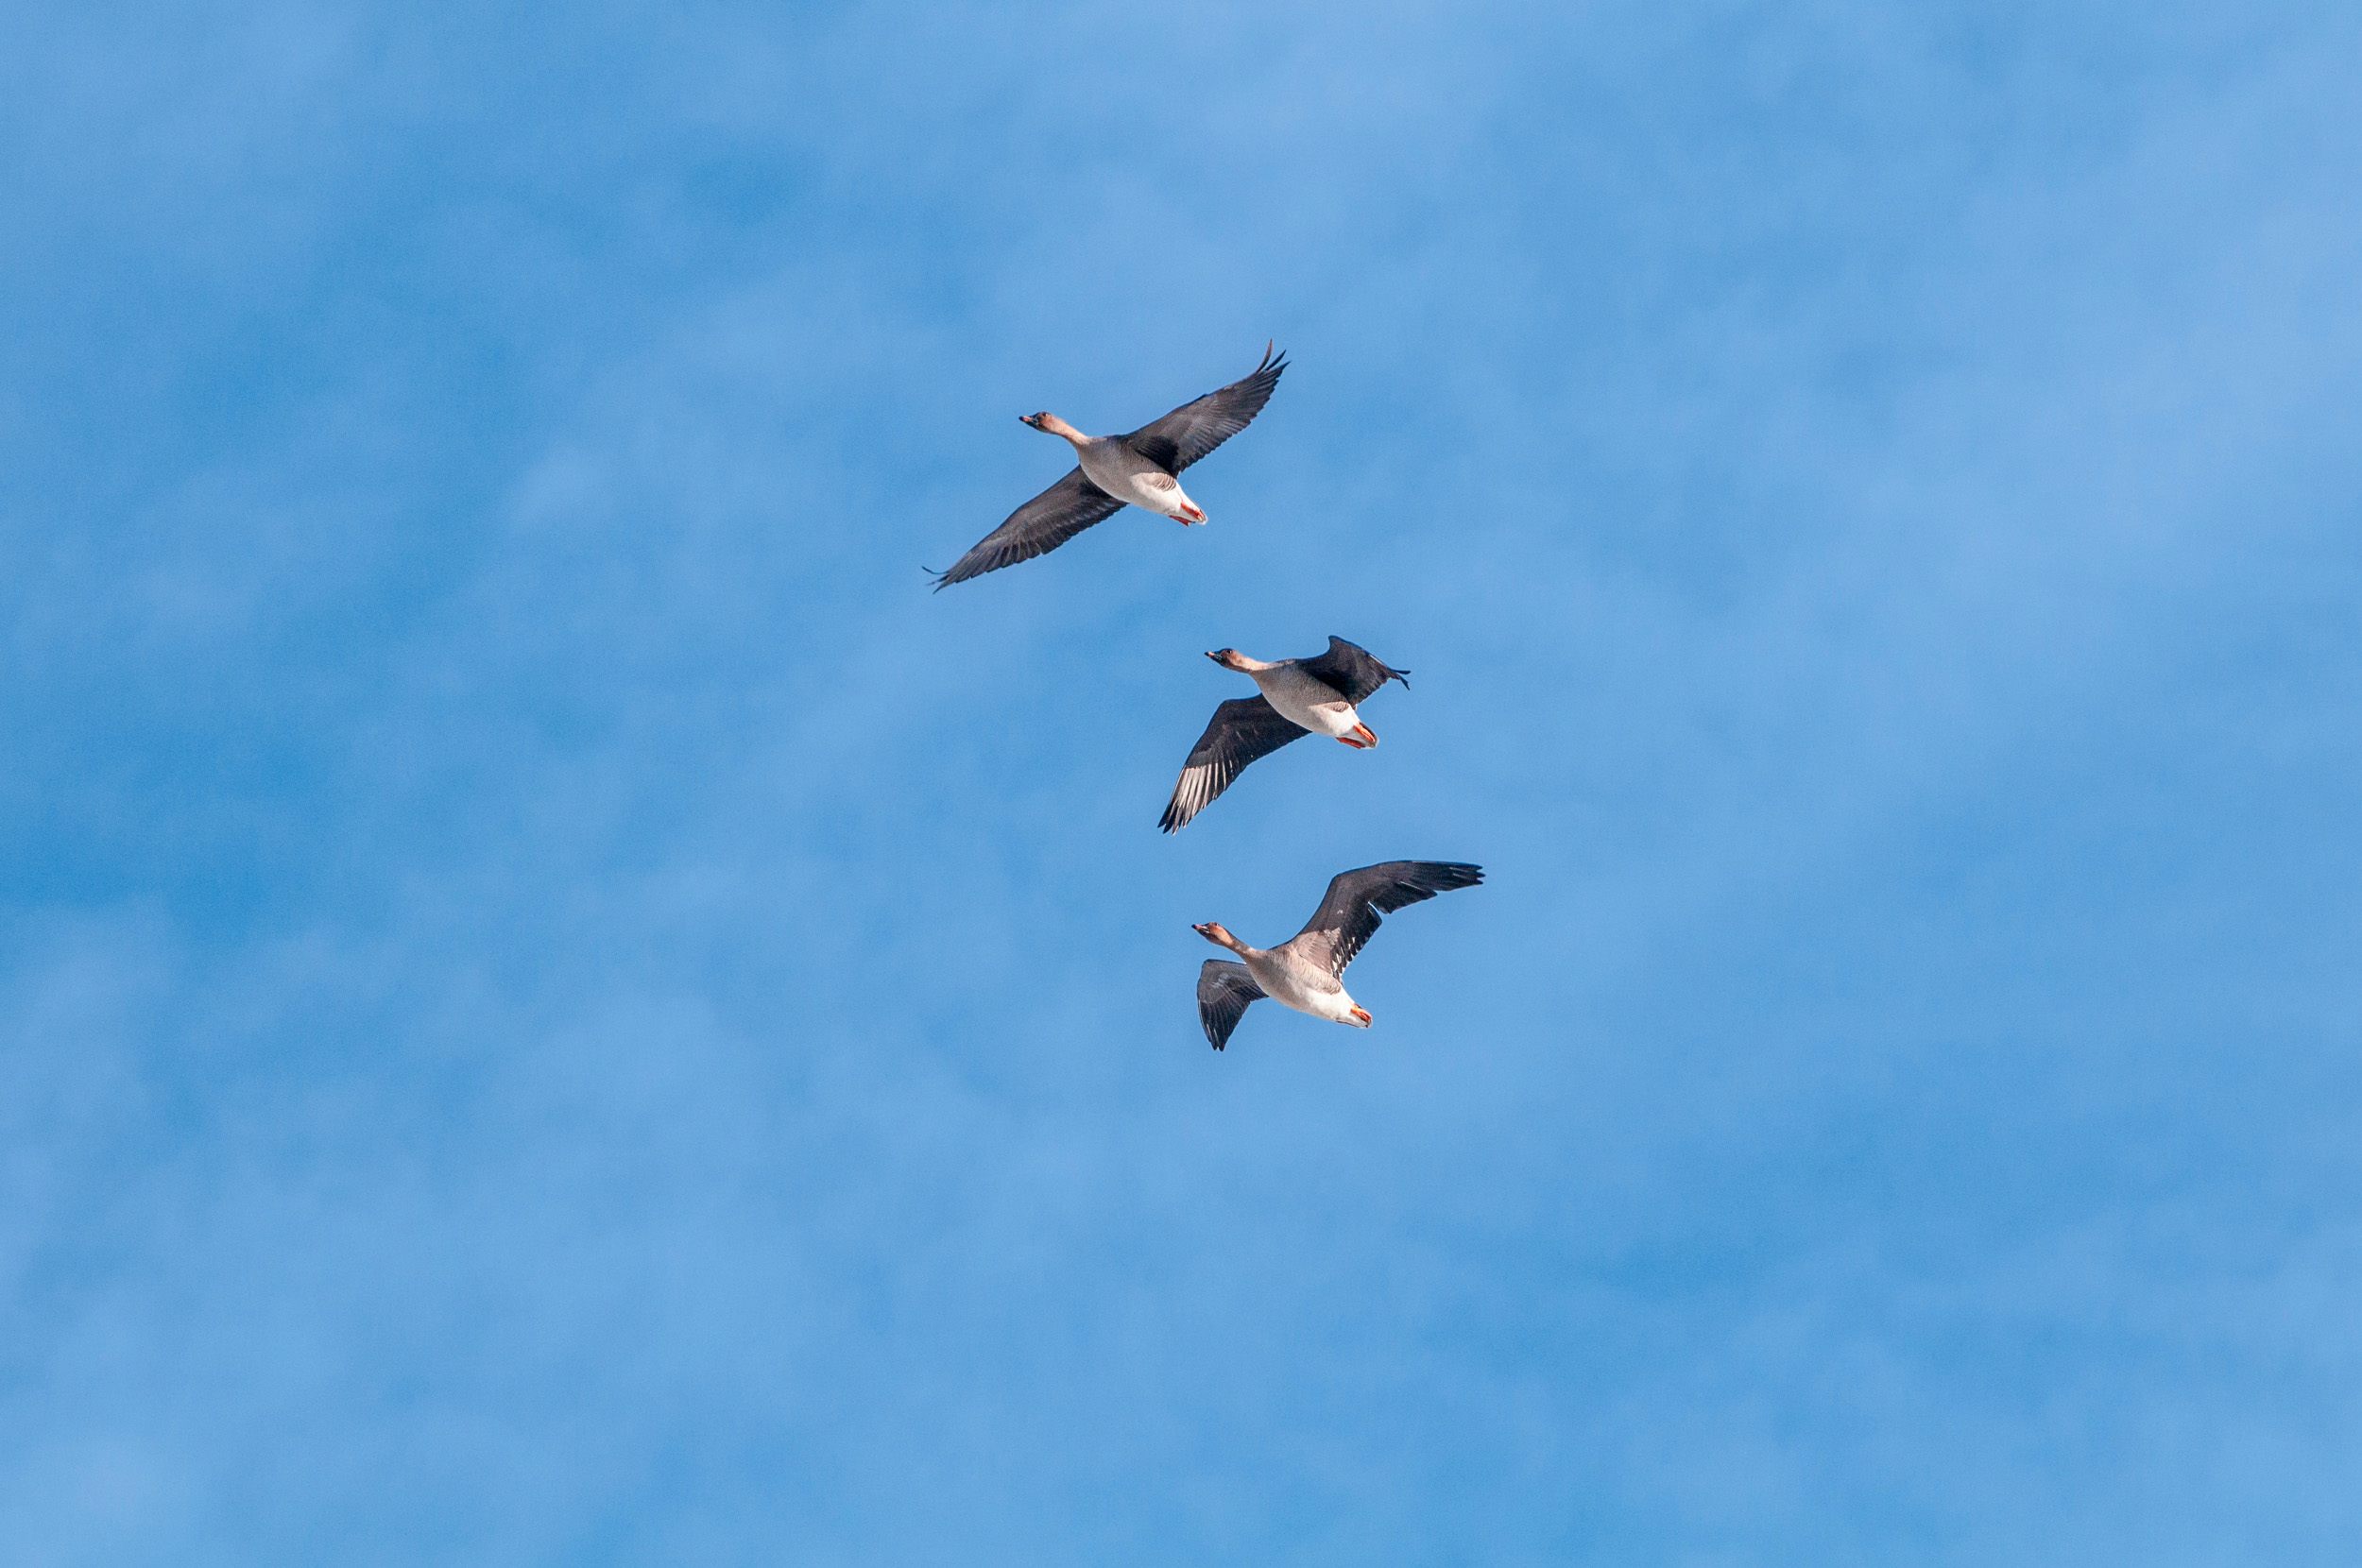 Three Bean Geese flying in a line overhead against a clear blue sky.